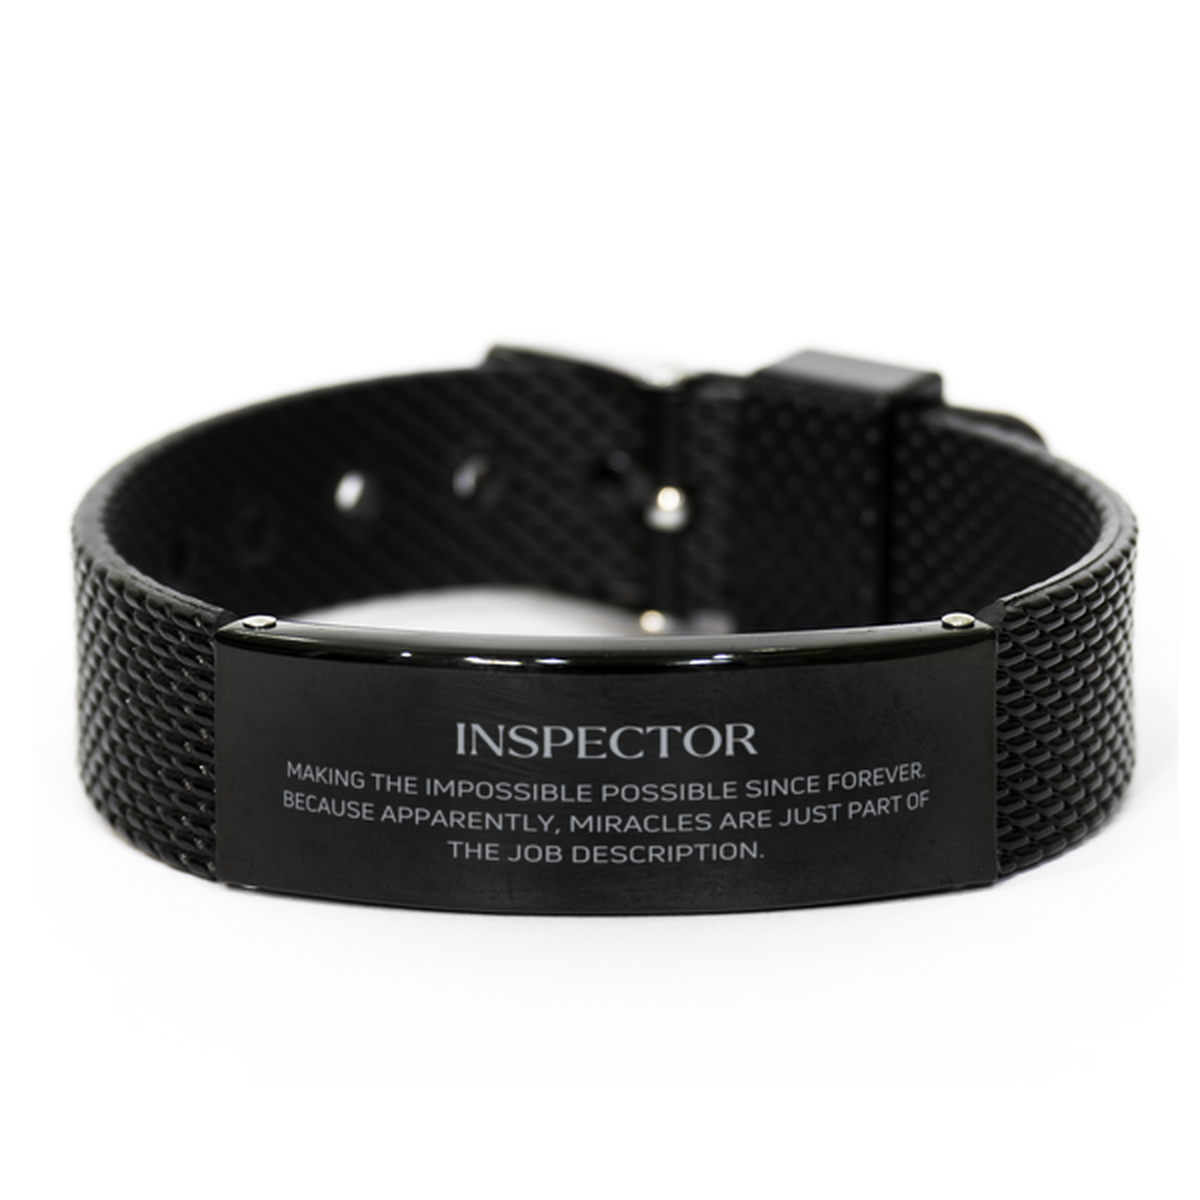 Funny Inspector Gifts, Miracles are just part of the job description, Inspirational Birthday Black Shark Mesh Bracelet For Inspector, Men, Women, Coworkers, Friends, Boss